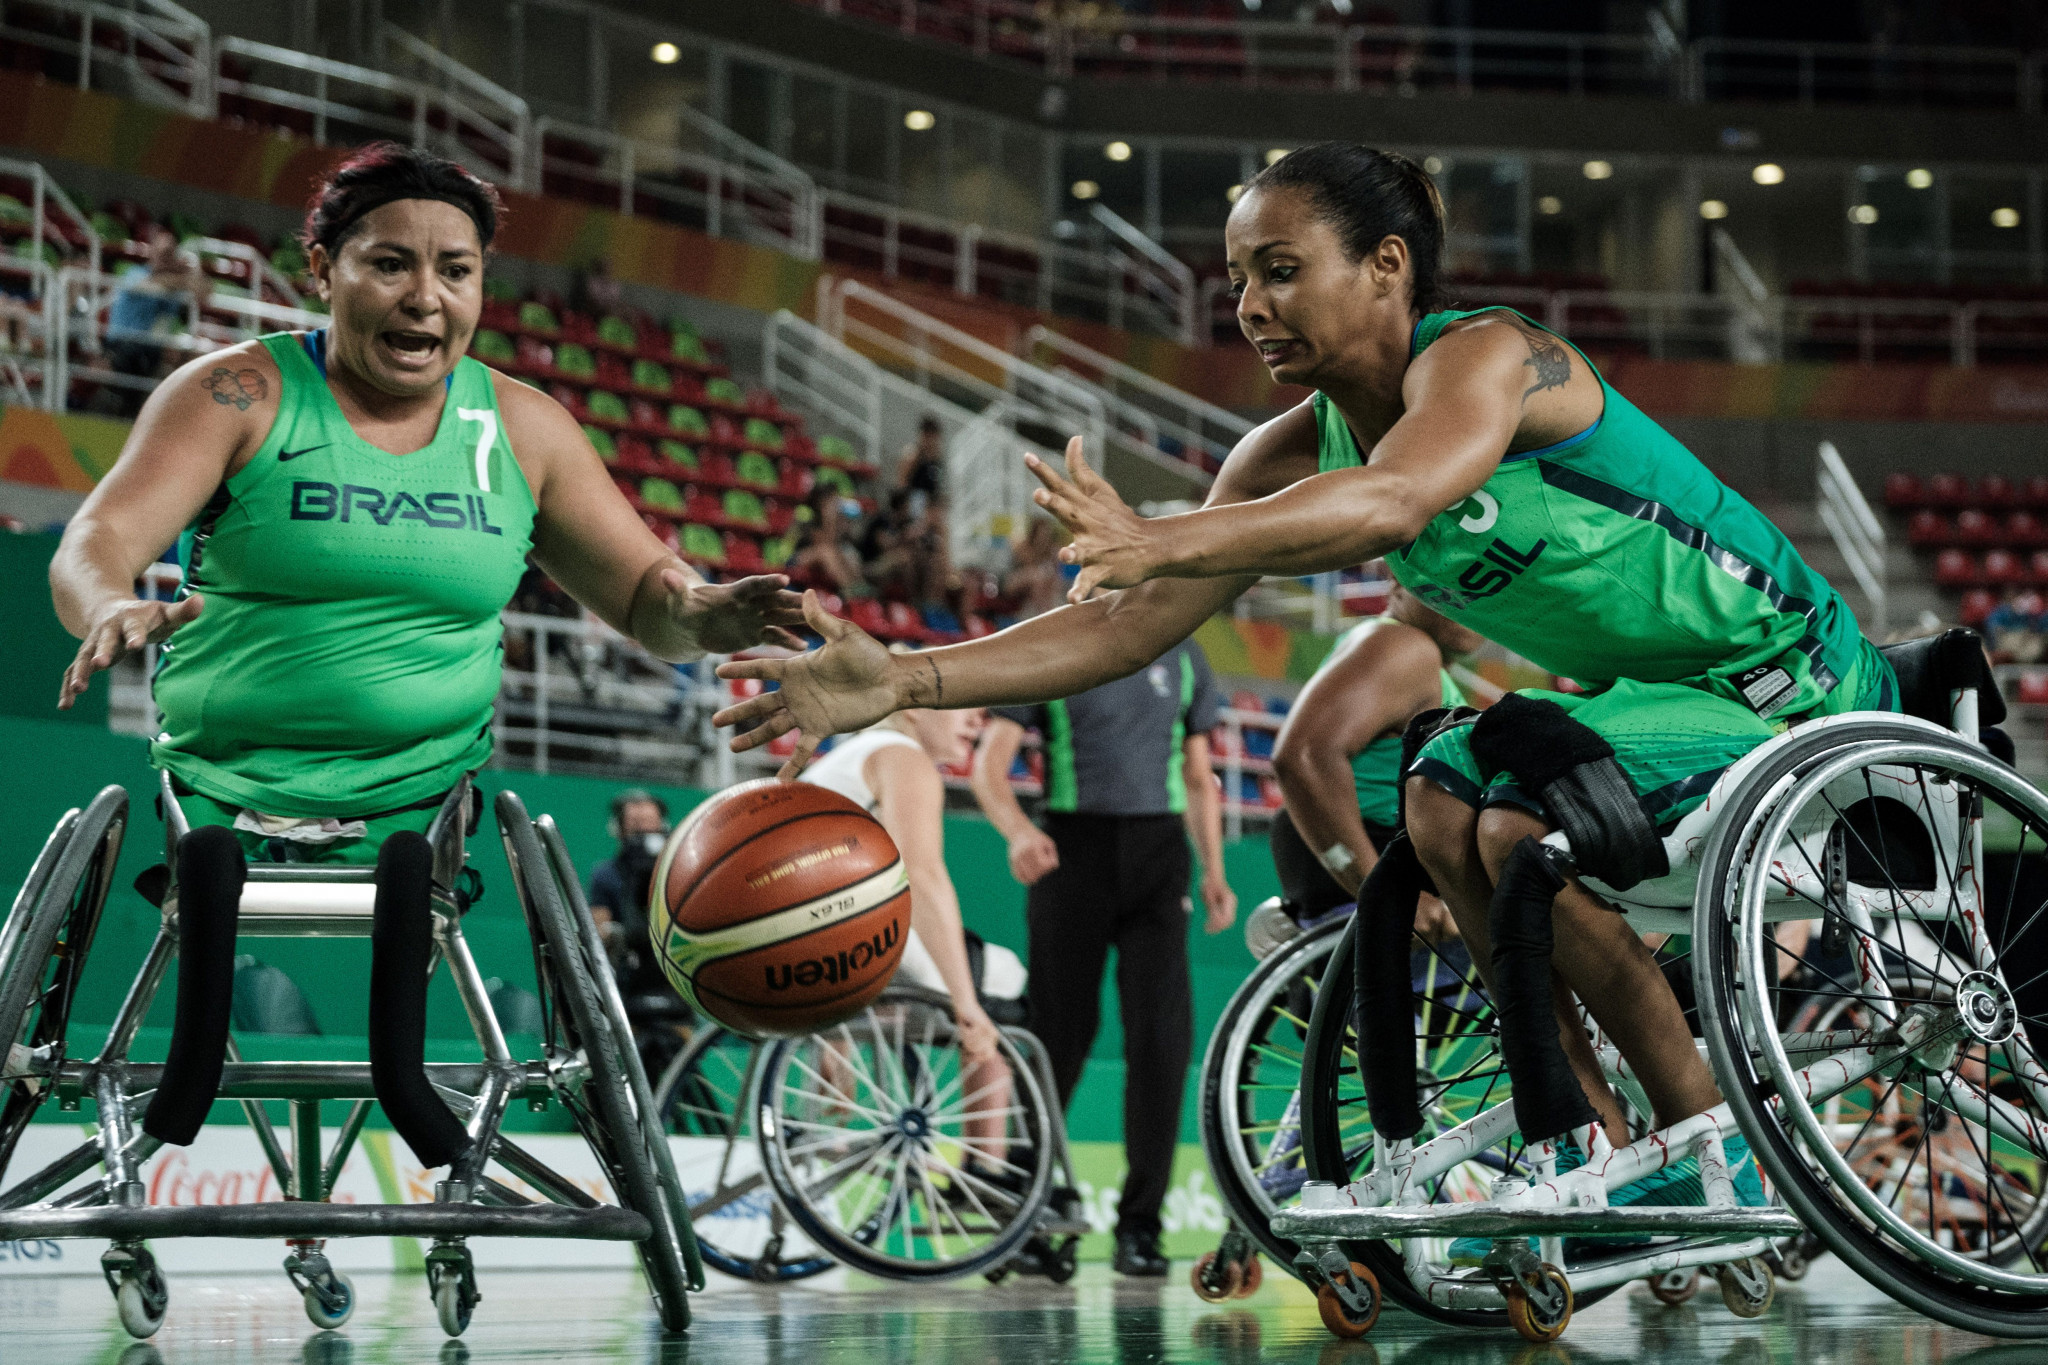 Brazil is hosting the International Wheelchair Basketball Federation Americas Cup ©Getty Images